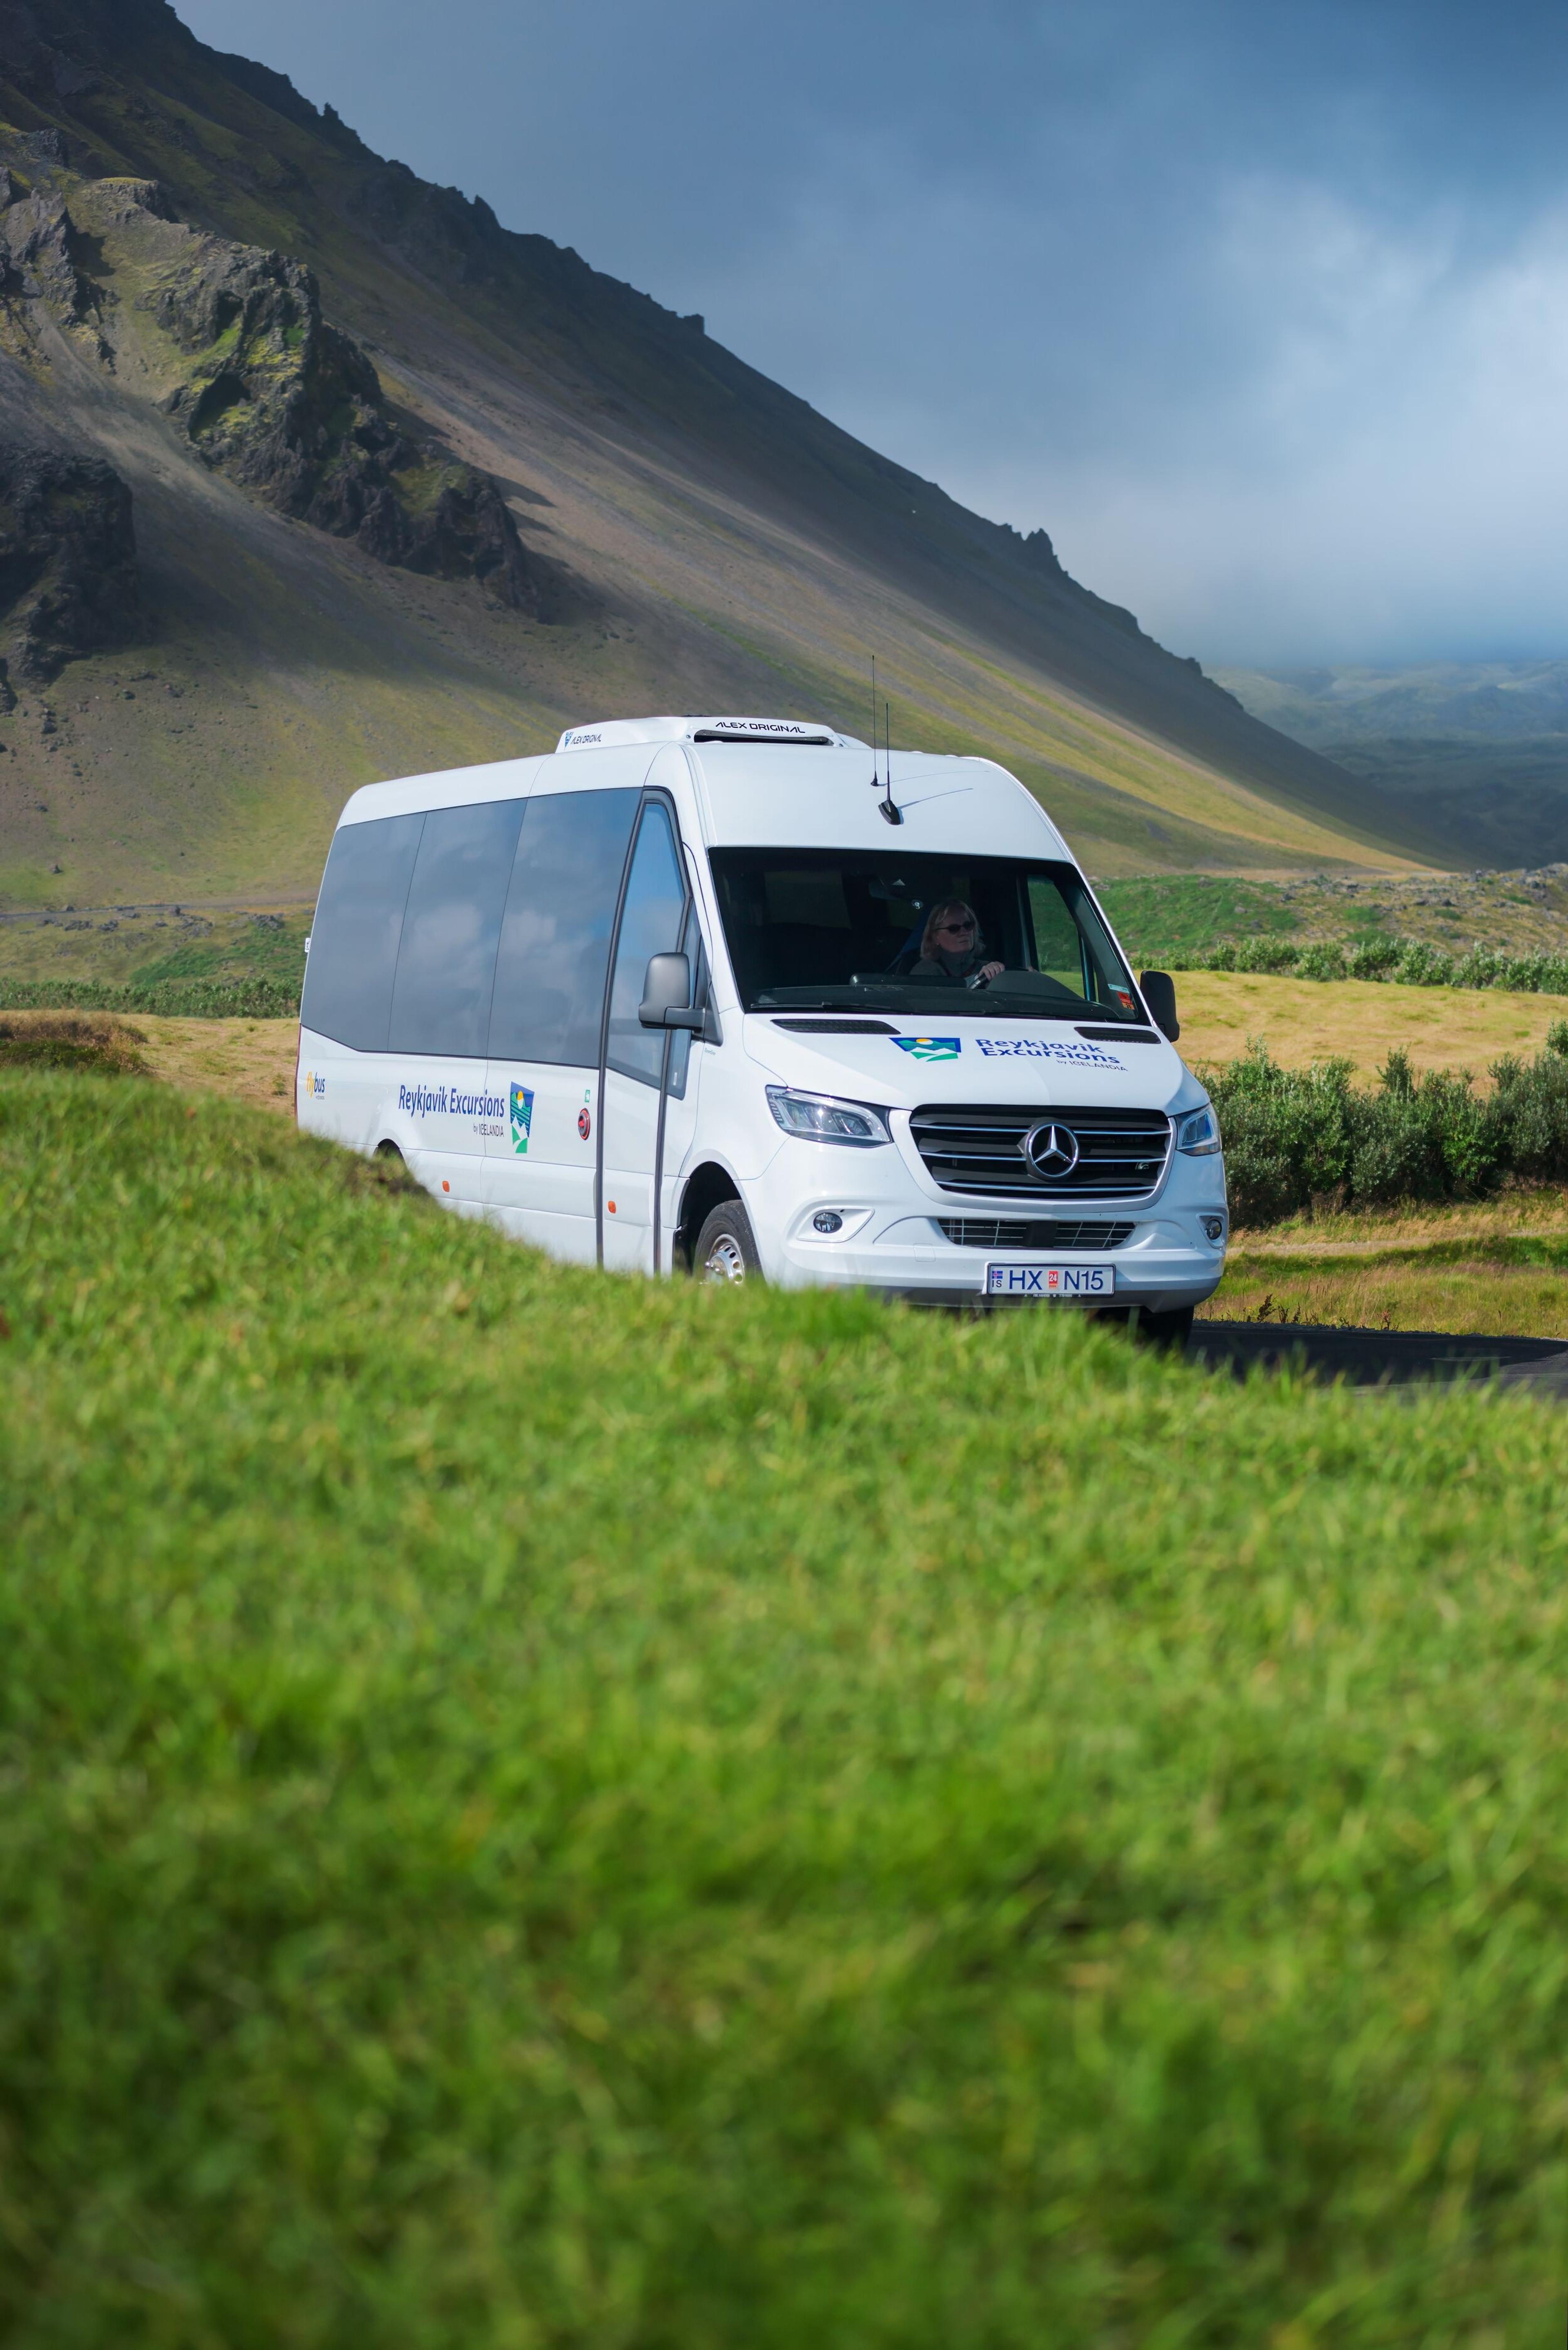 A white Reykjavik Excursions tour bus, marked as carbon neutral, travels through a lush green landscape on a sunny day.